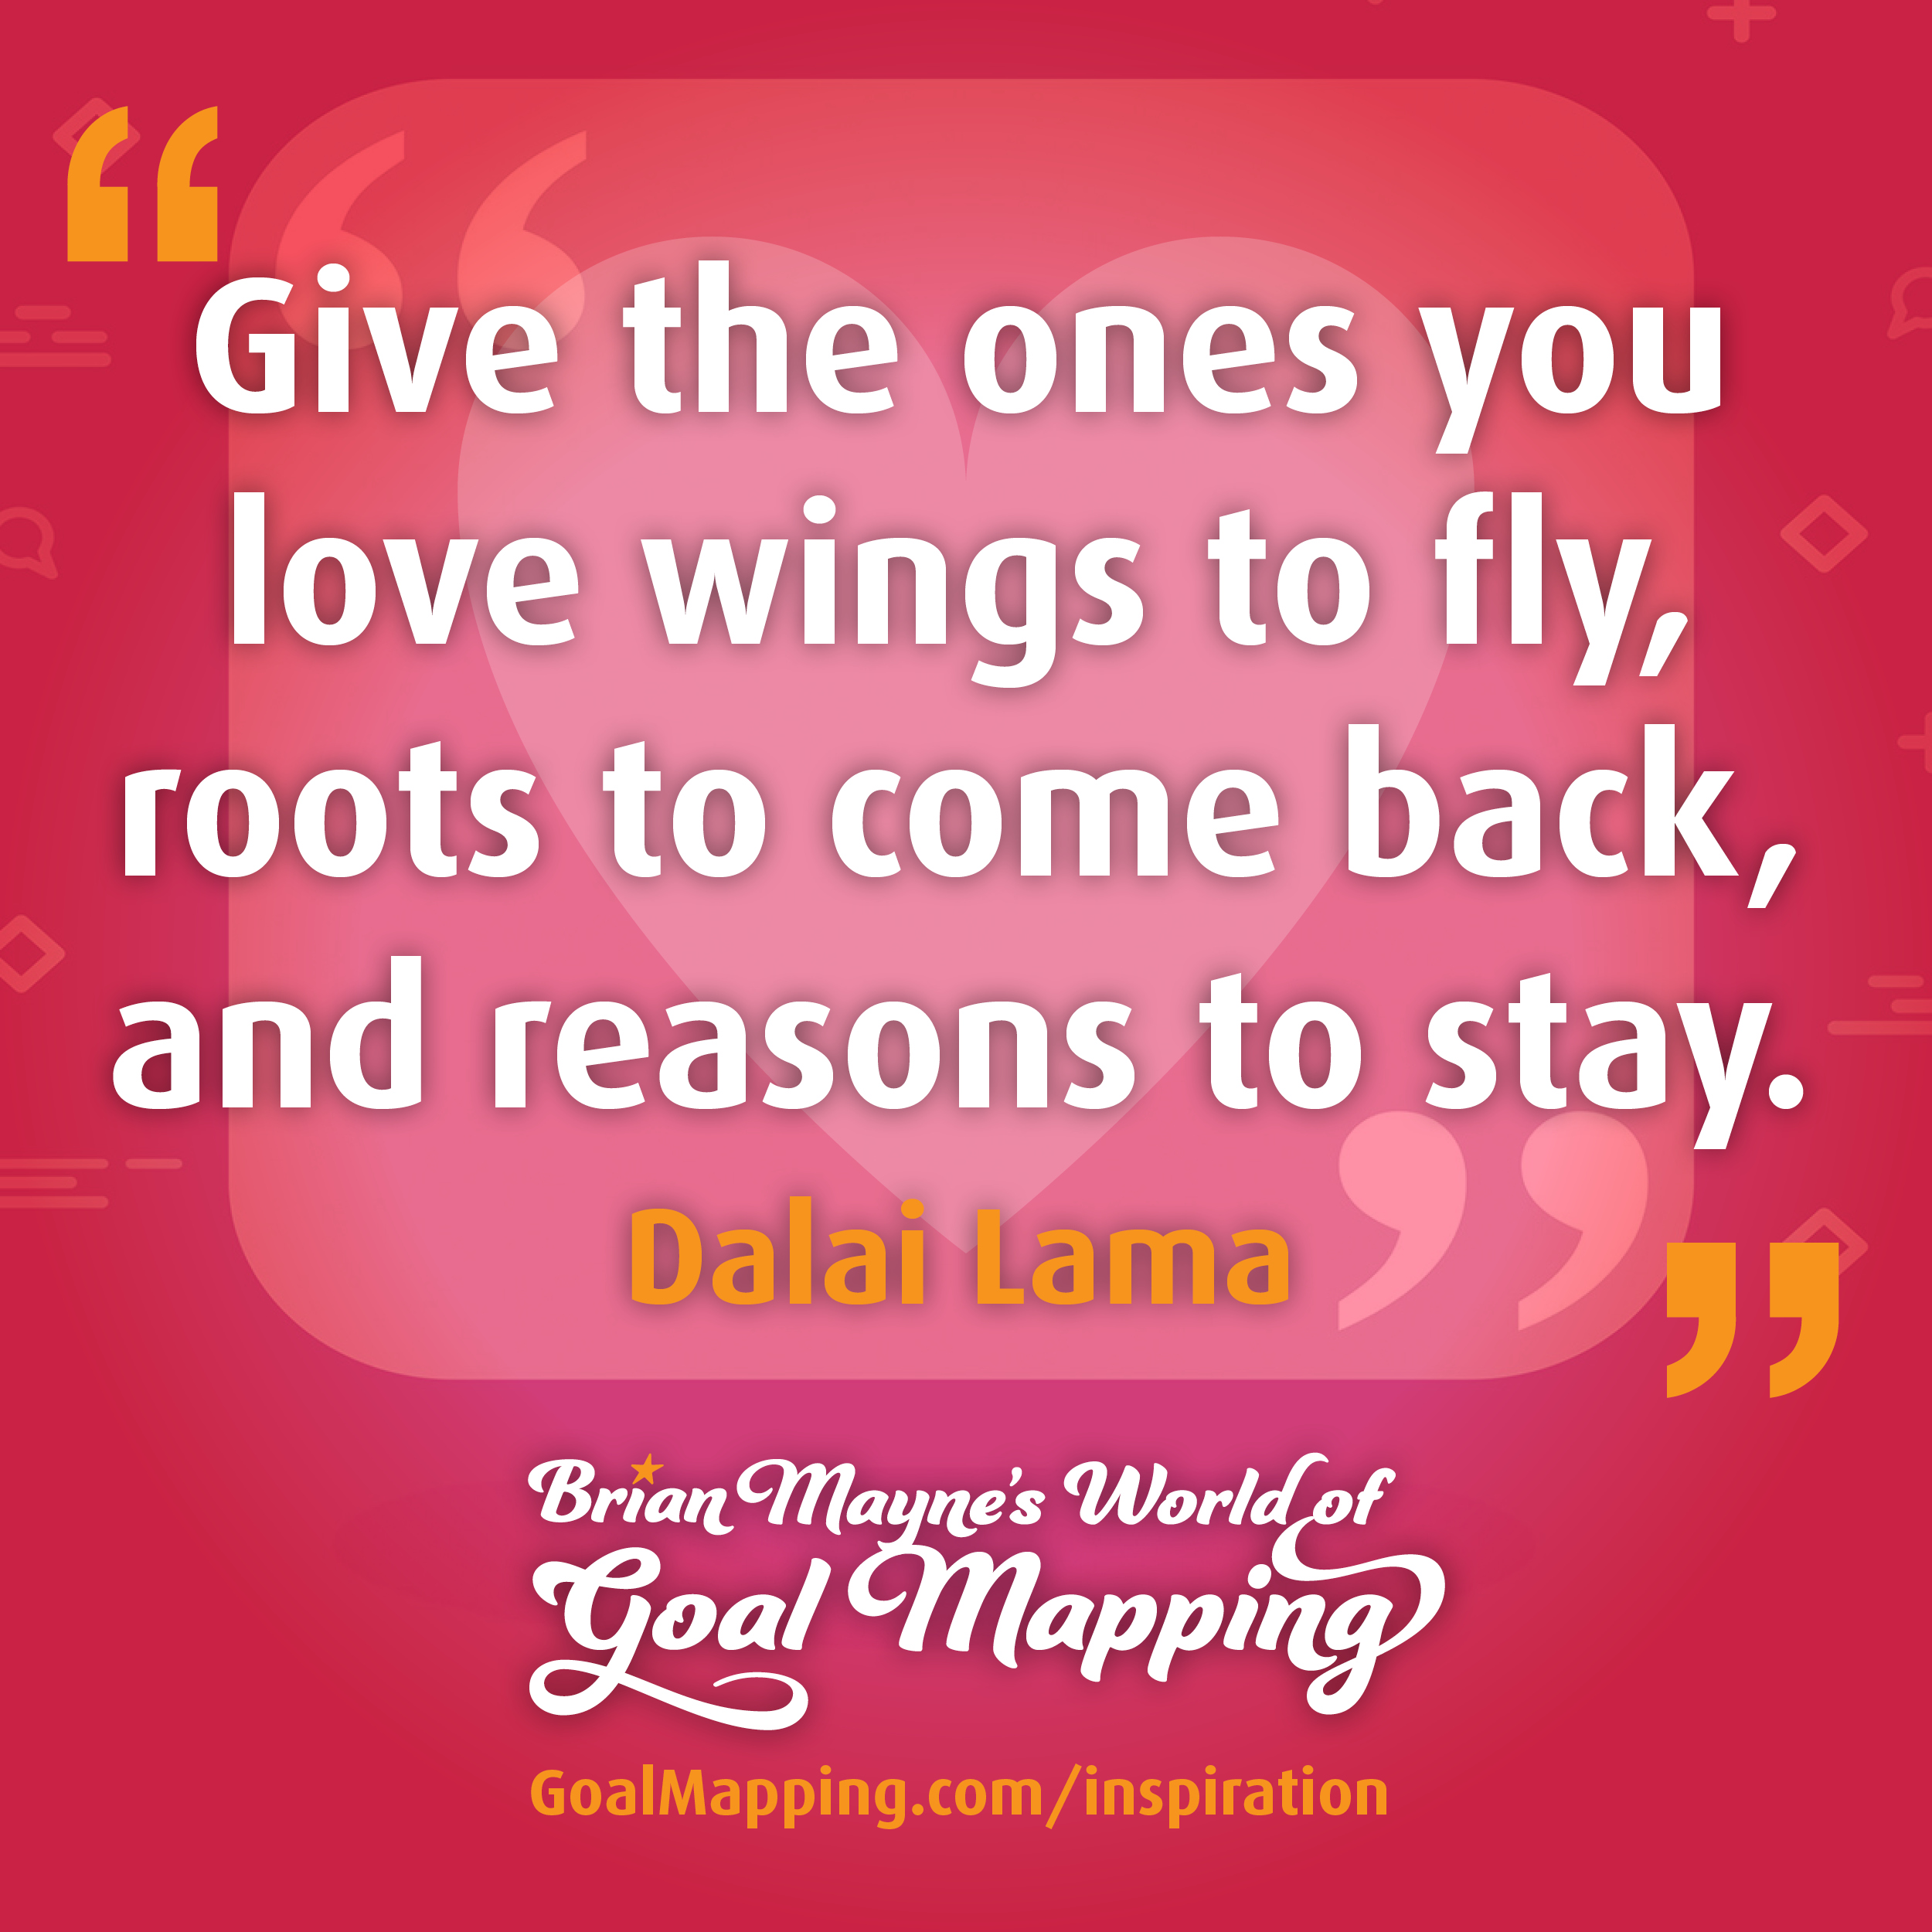 "Give the ones you love wings to fly, roots to come back, and reasons to stay." Dalai Lama